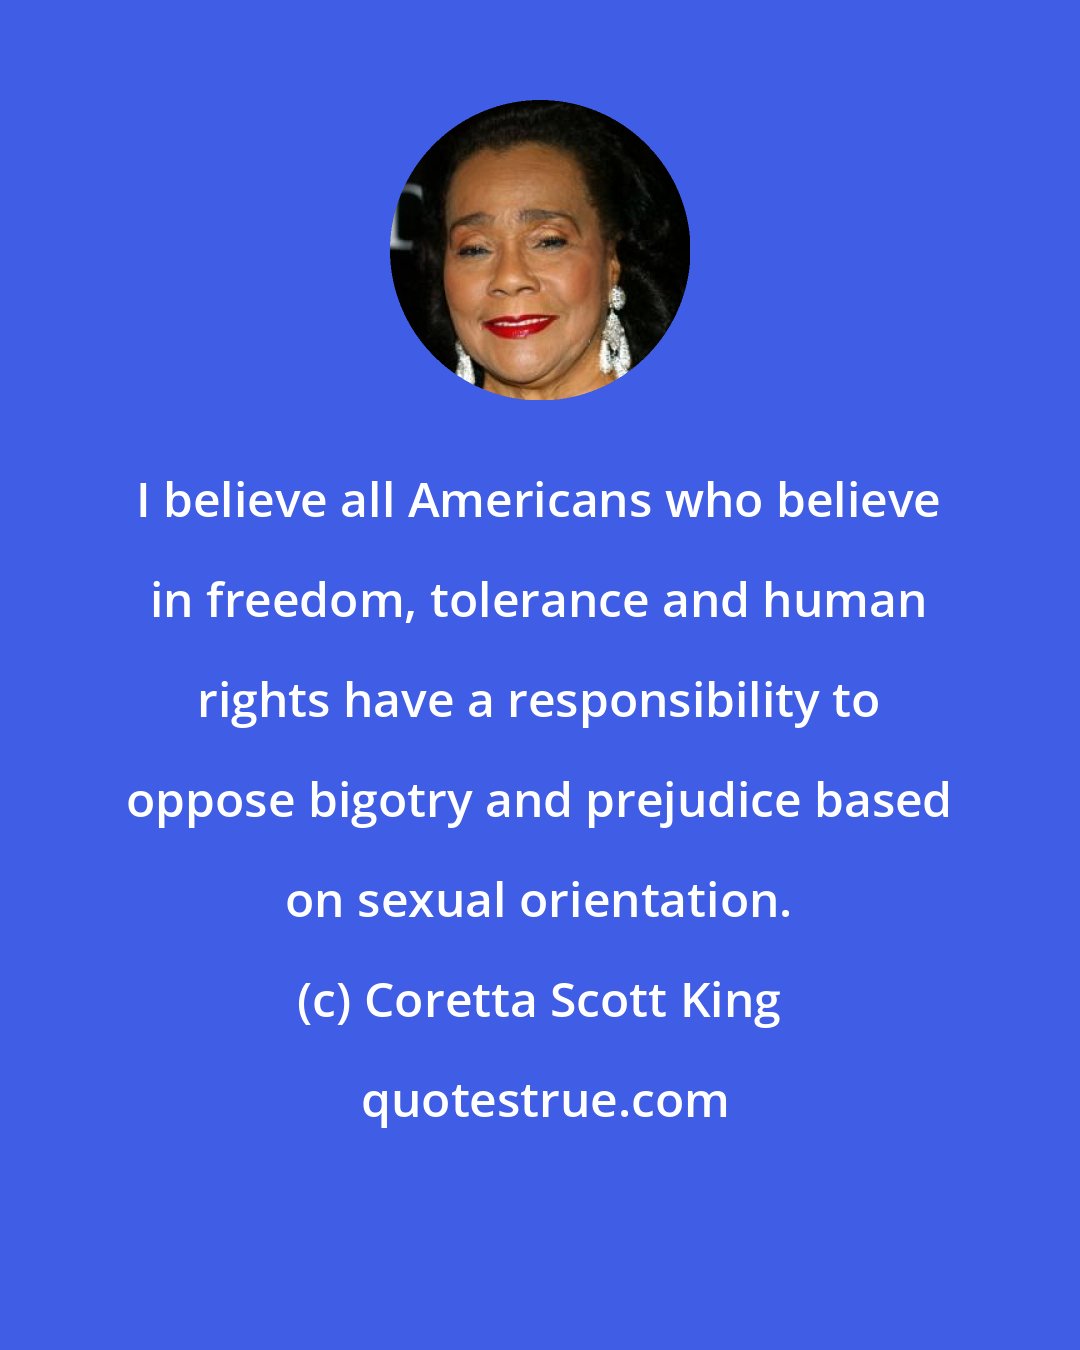 Coretta Scott King: I believe all Americans who believe in freedom, tolerance and human rights have a responsibility to oppose bigotry and prejudice based on sexual orientation.